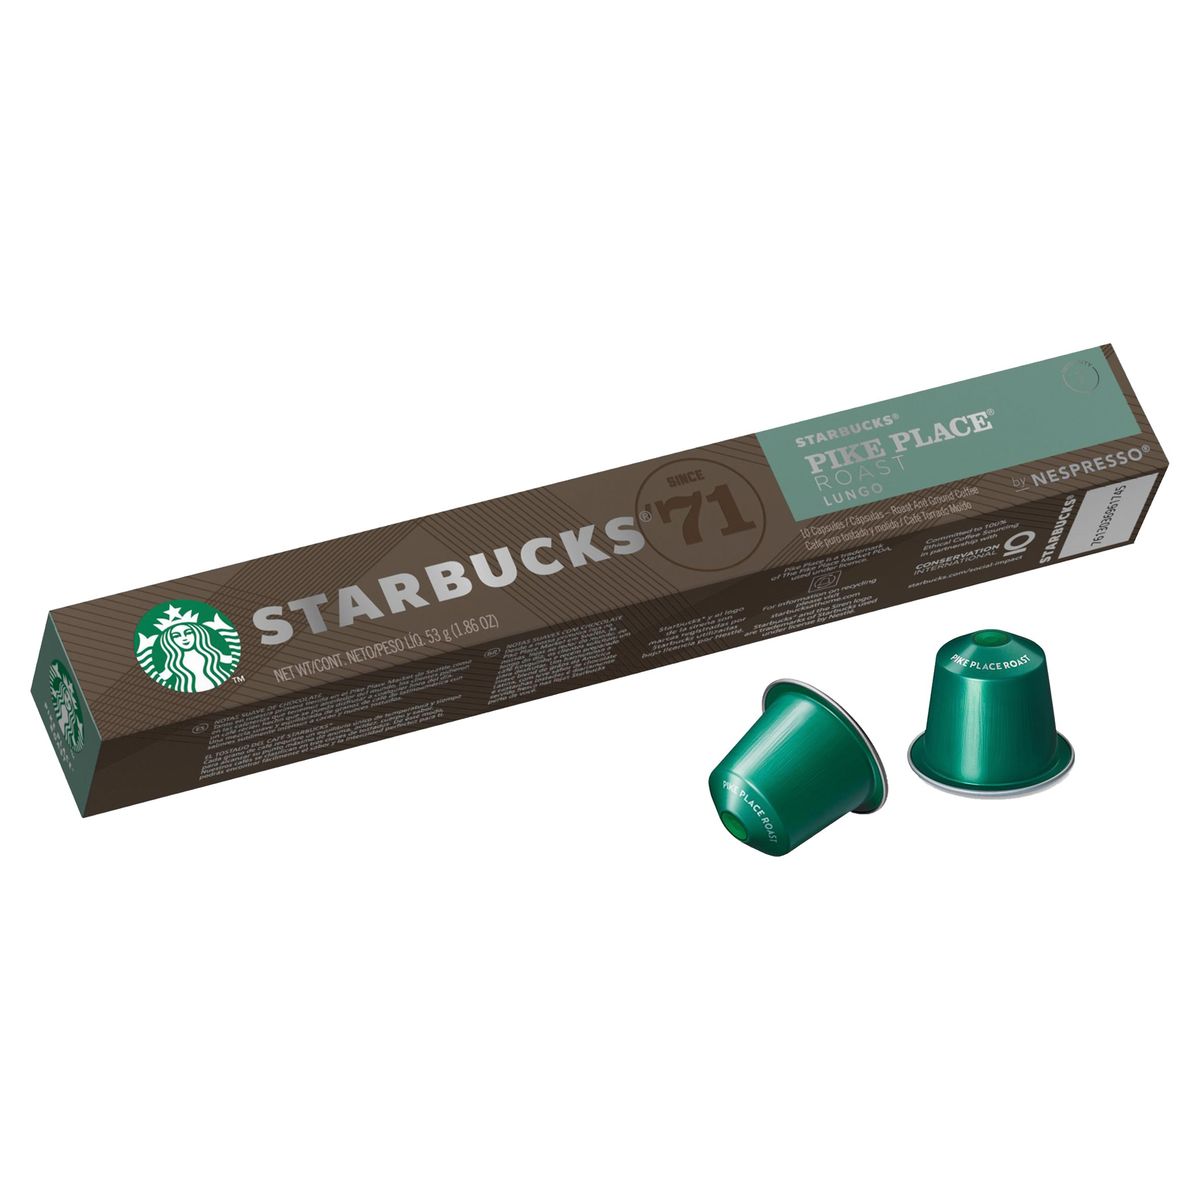 Starbucks by Nespresso Koffie Pike Place 10 Capsules 12x53g